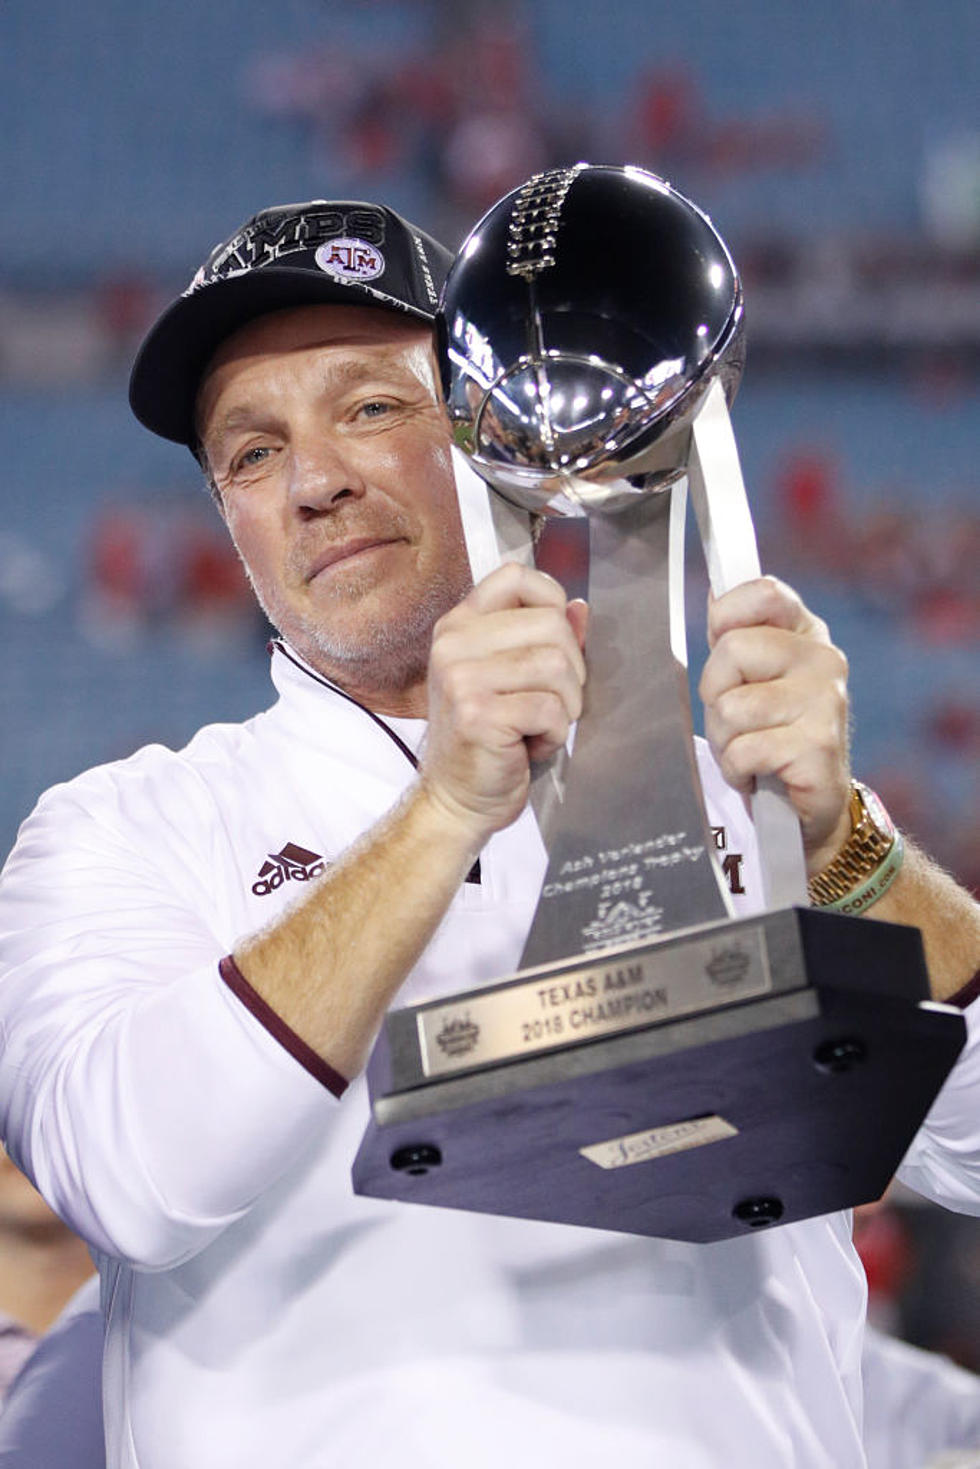 AP Sources: NCAA Committee to Consider Replacing A&M in Bowl